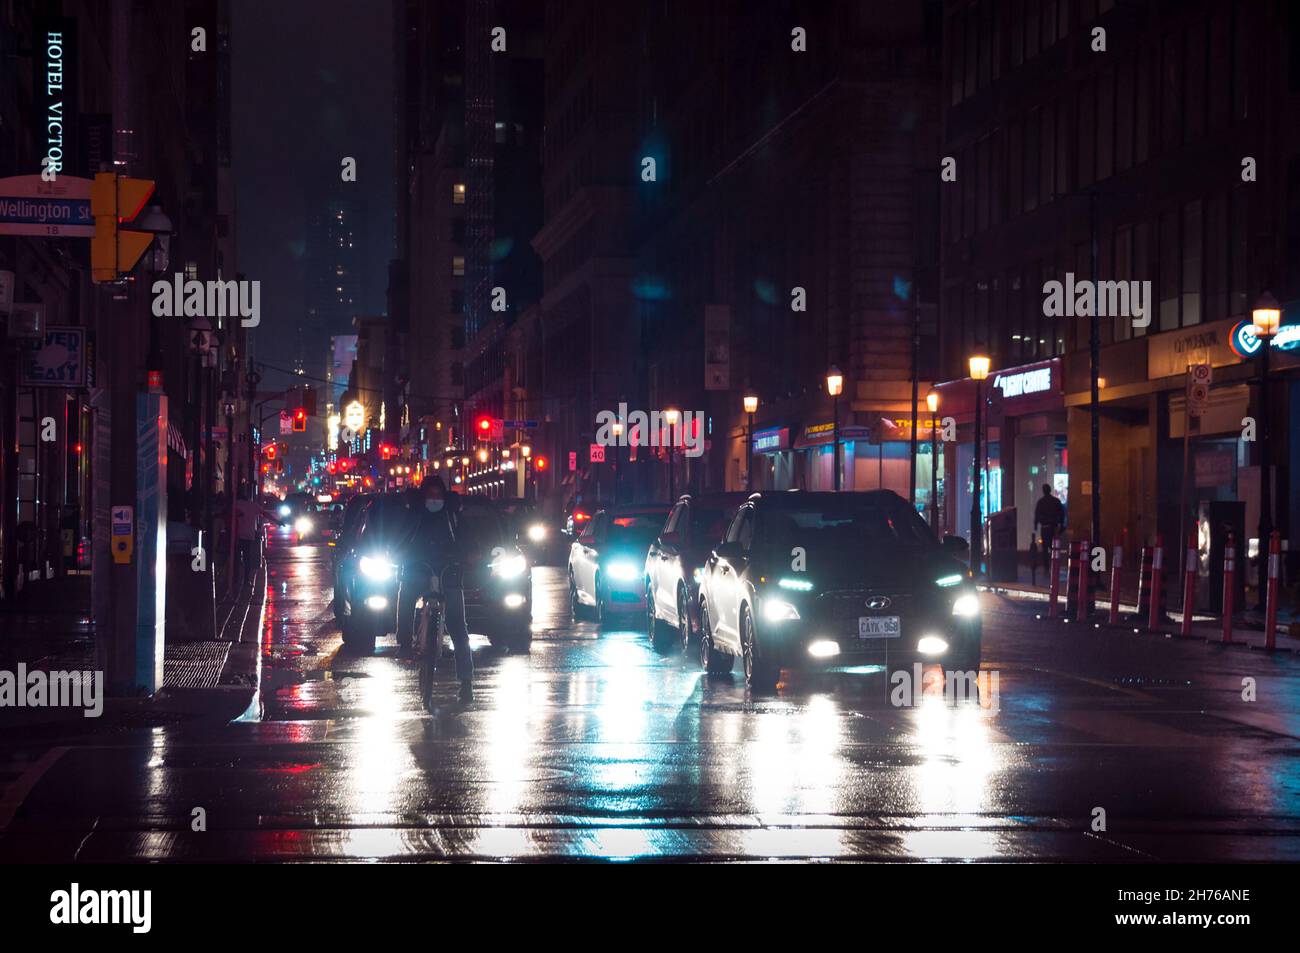 Toronto, Canada - 10 30 2021: Rainy night view along Yonge street from Wellington street in downtown Toronto with a cyclist in a mask, cars waiting fo Stock Photo